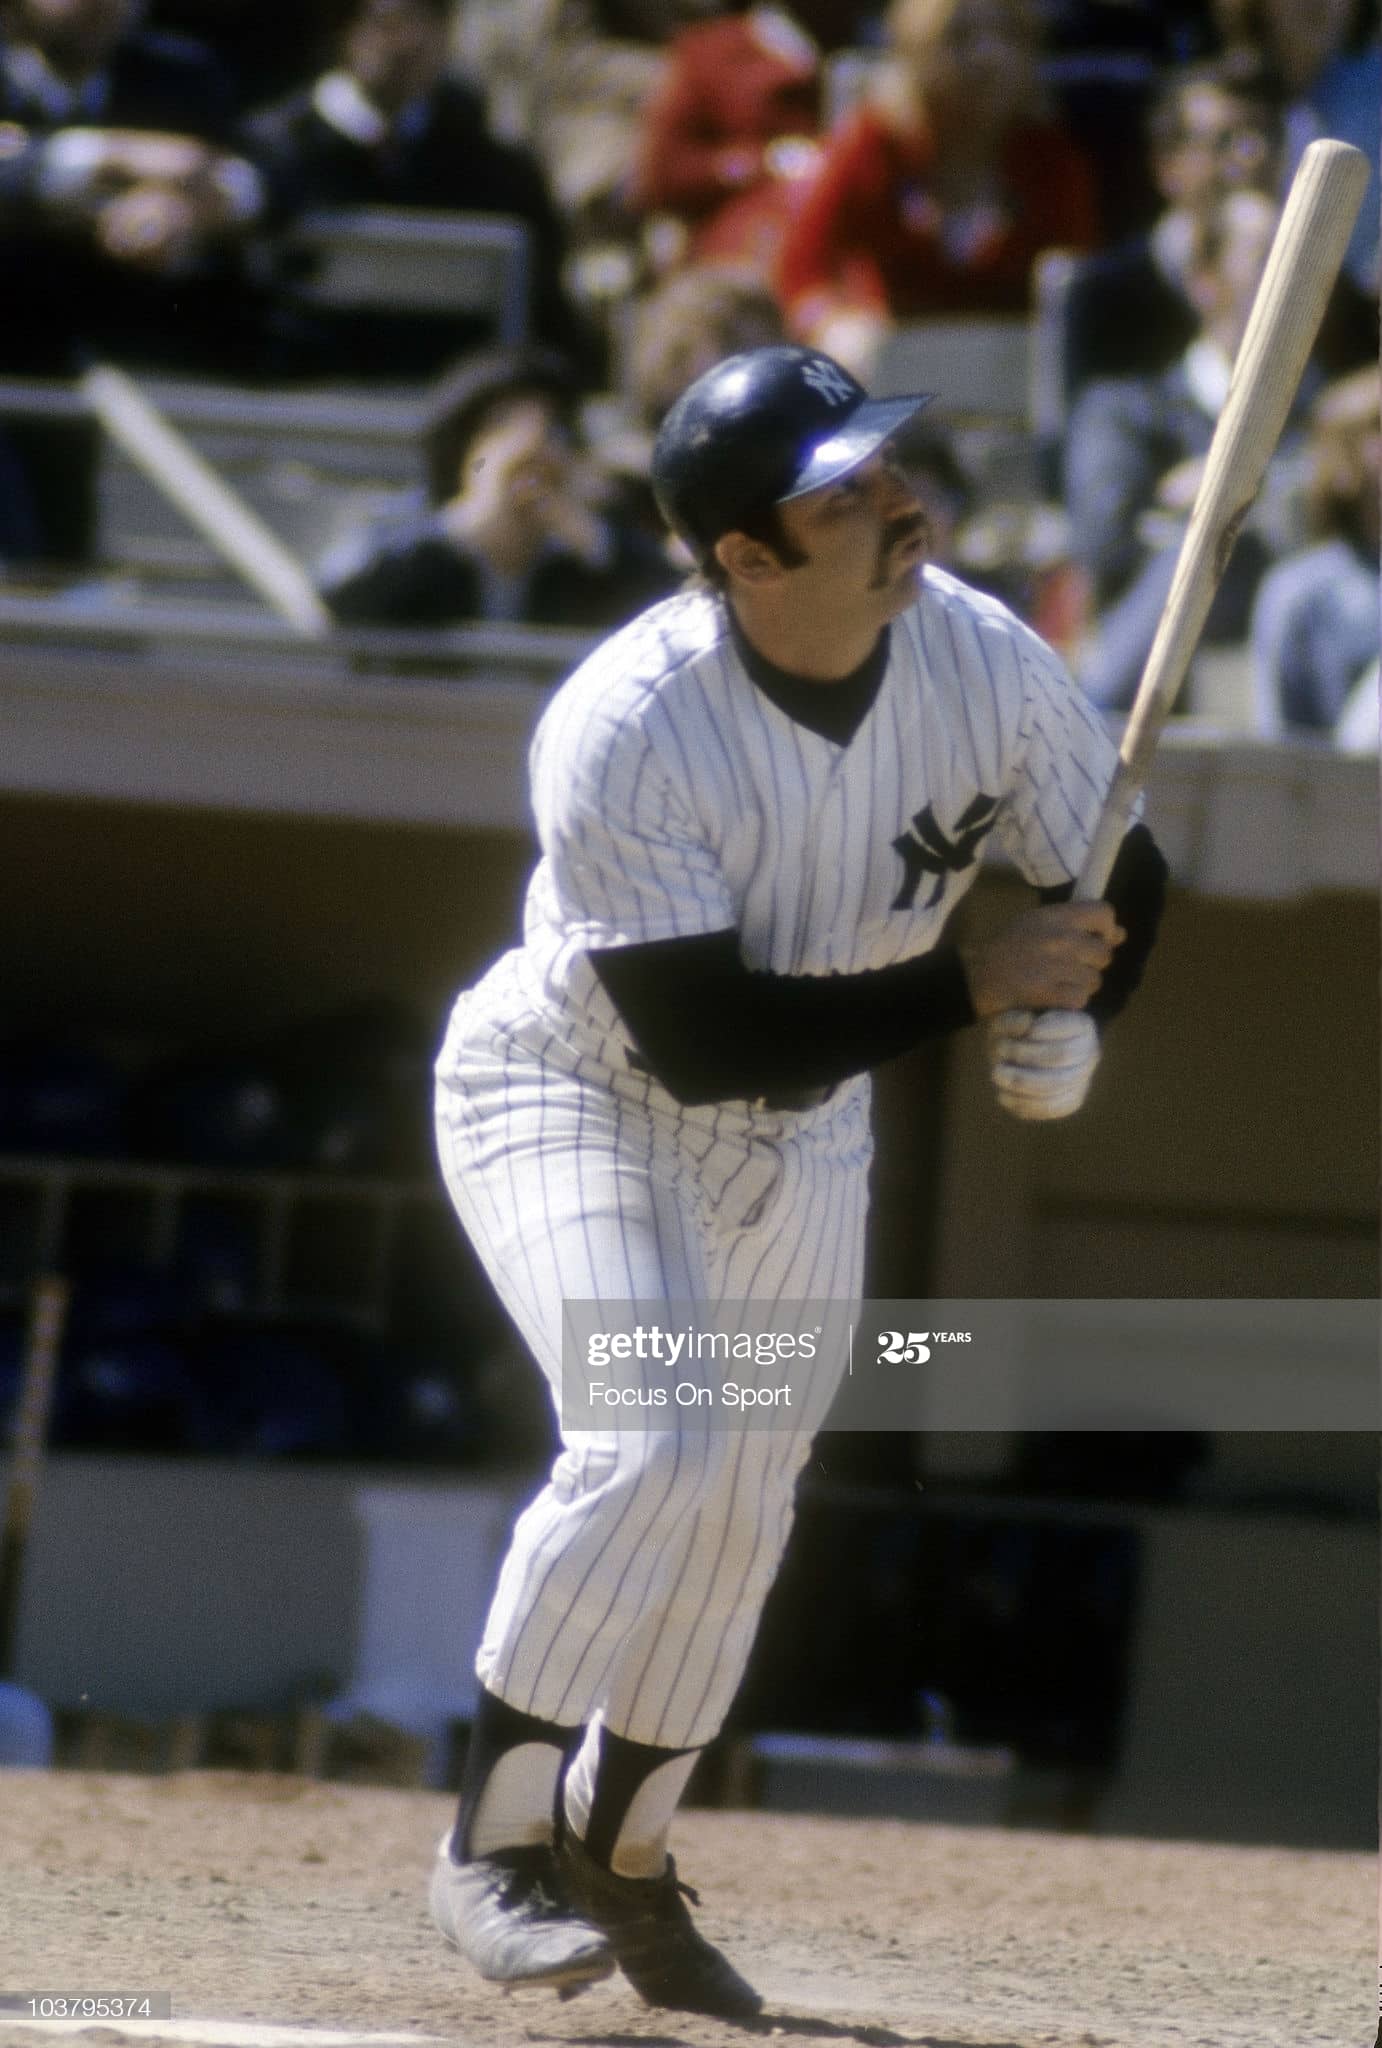 thurman munson hitting for the yankees in 1975